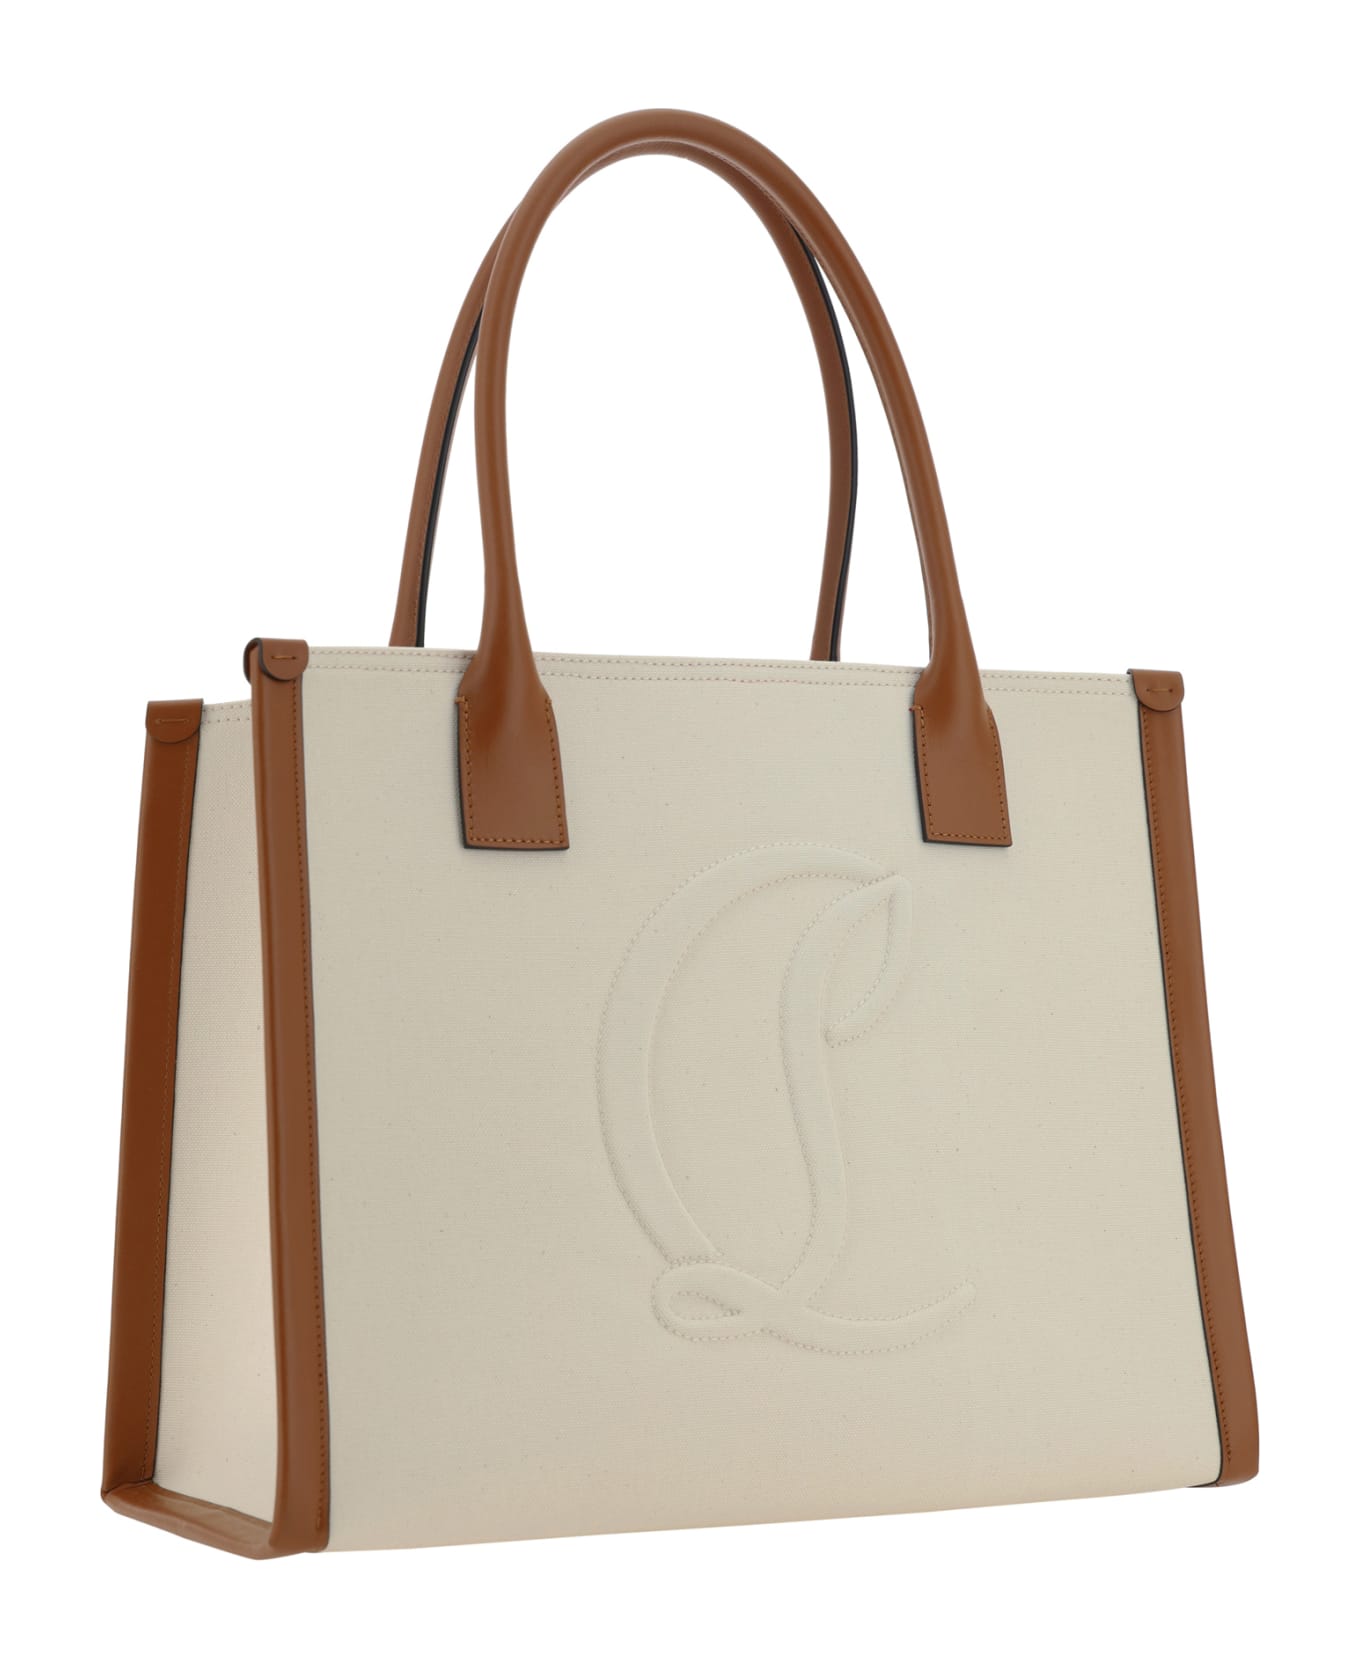 Christian Louboutin By My Side Large Handbag - Natural/cuoio